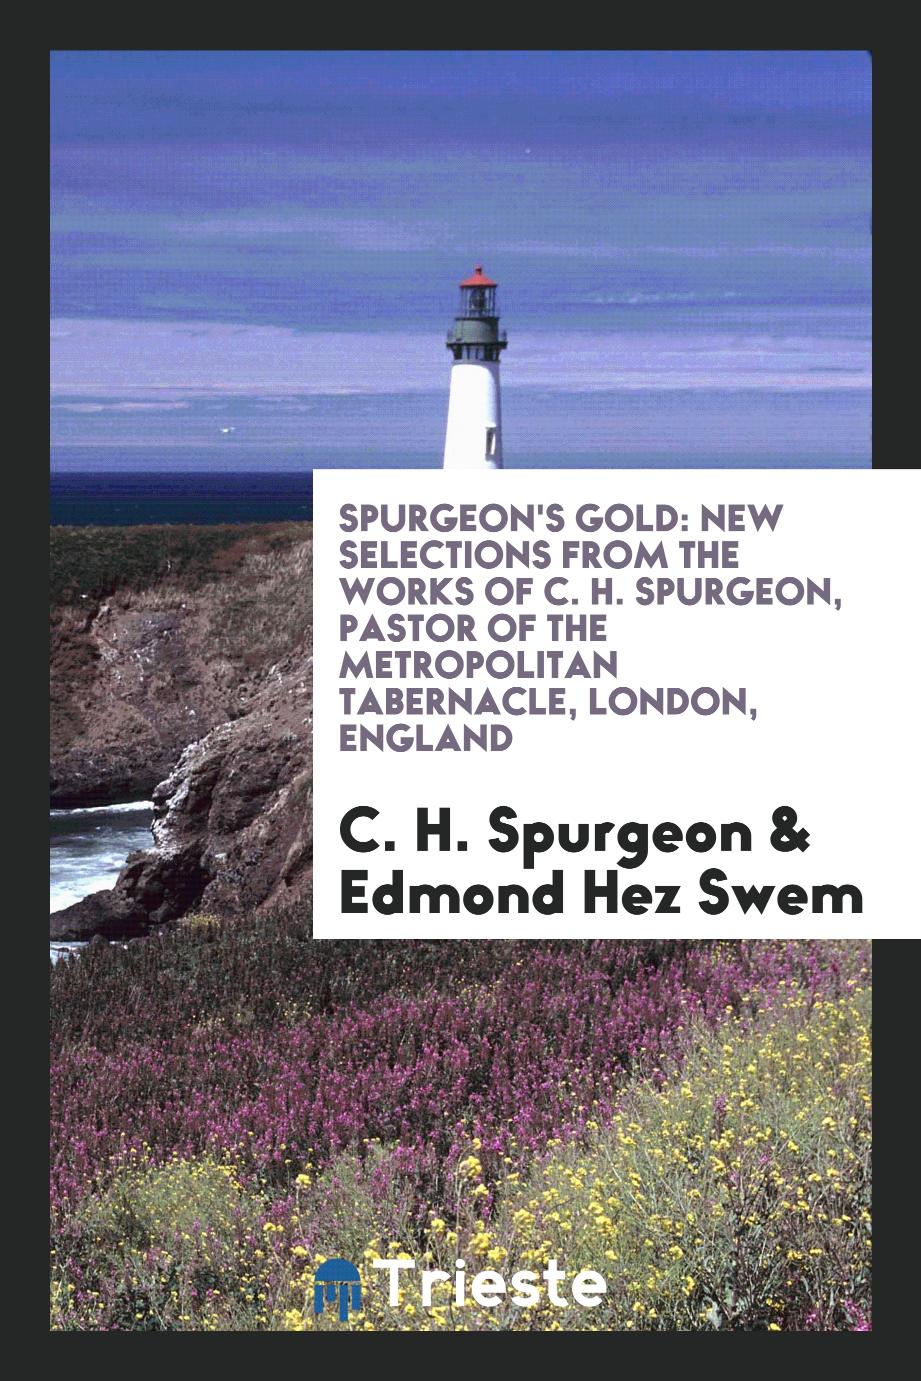 Spurgeon's gold: new selections from the works of C. H. Spurgeon, pastor of the Metropolitan Tabernacle, London, England